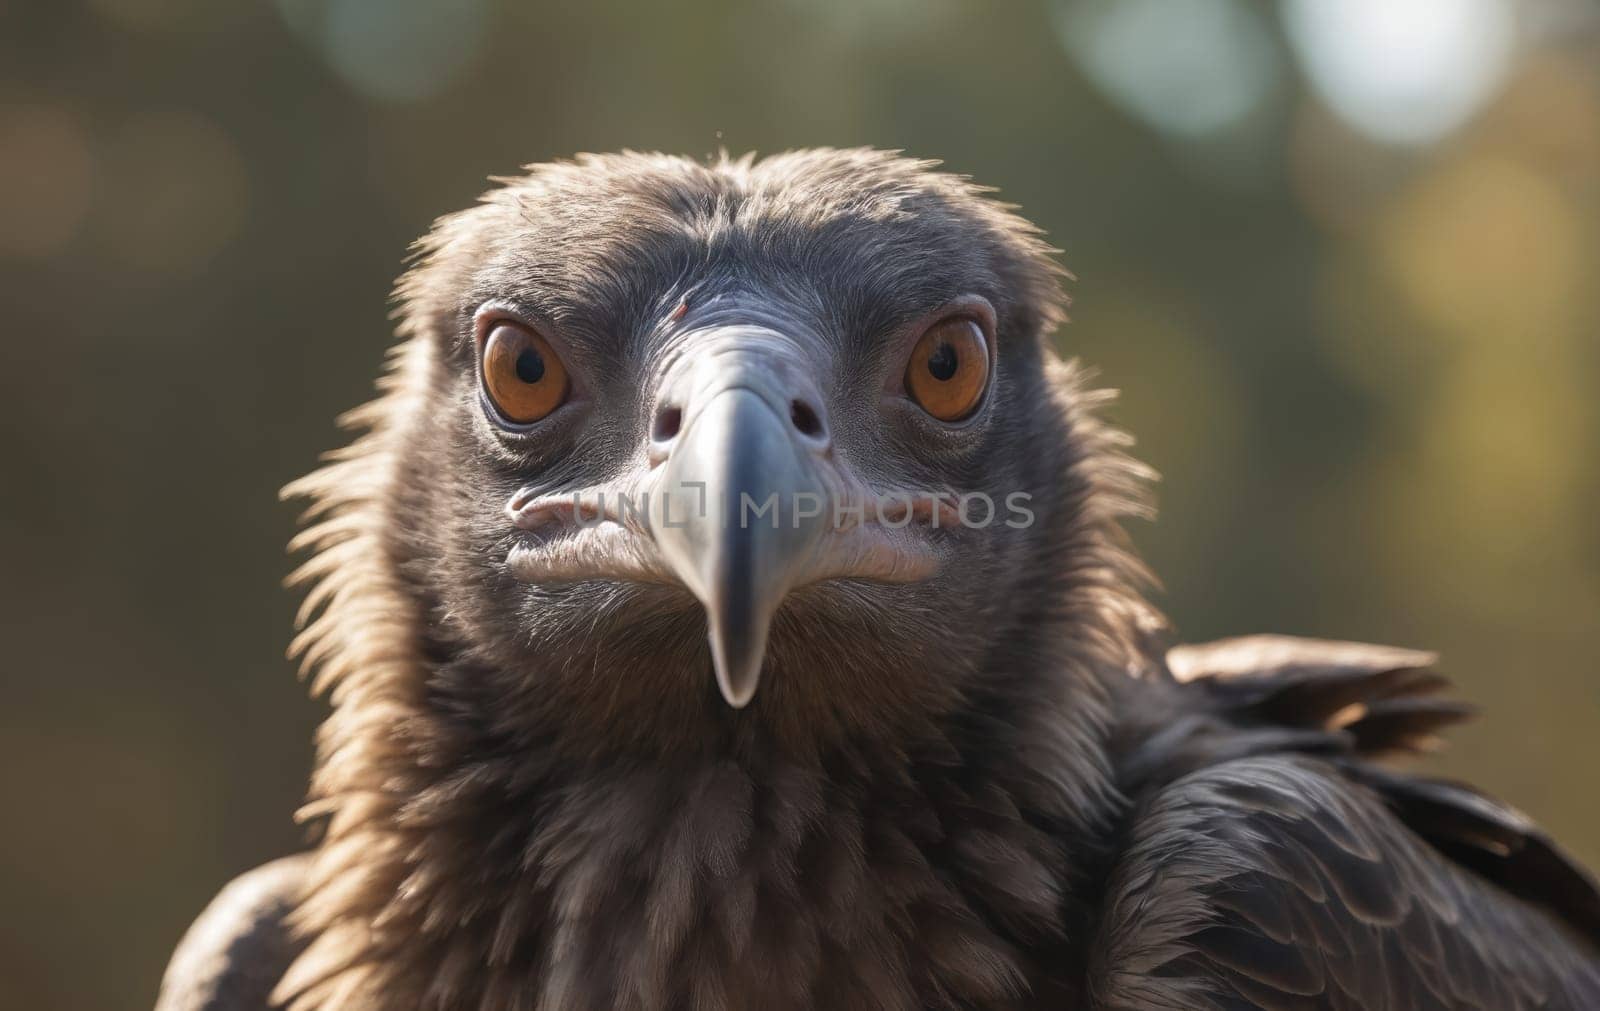 A closeup of a vulture, a bird of prey in the Accipitridae family, with its sharp beak and piercing eyes, staring directly at the camera